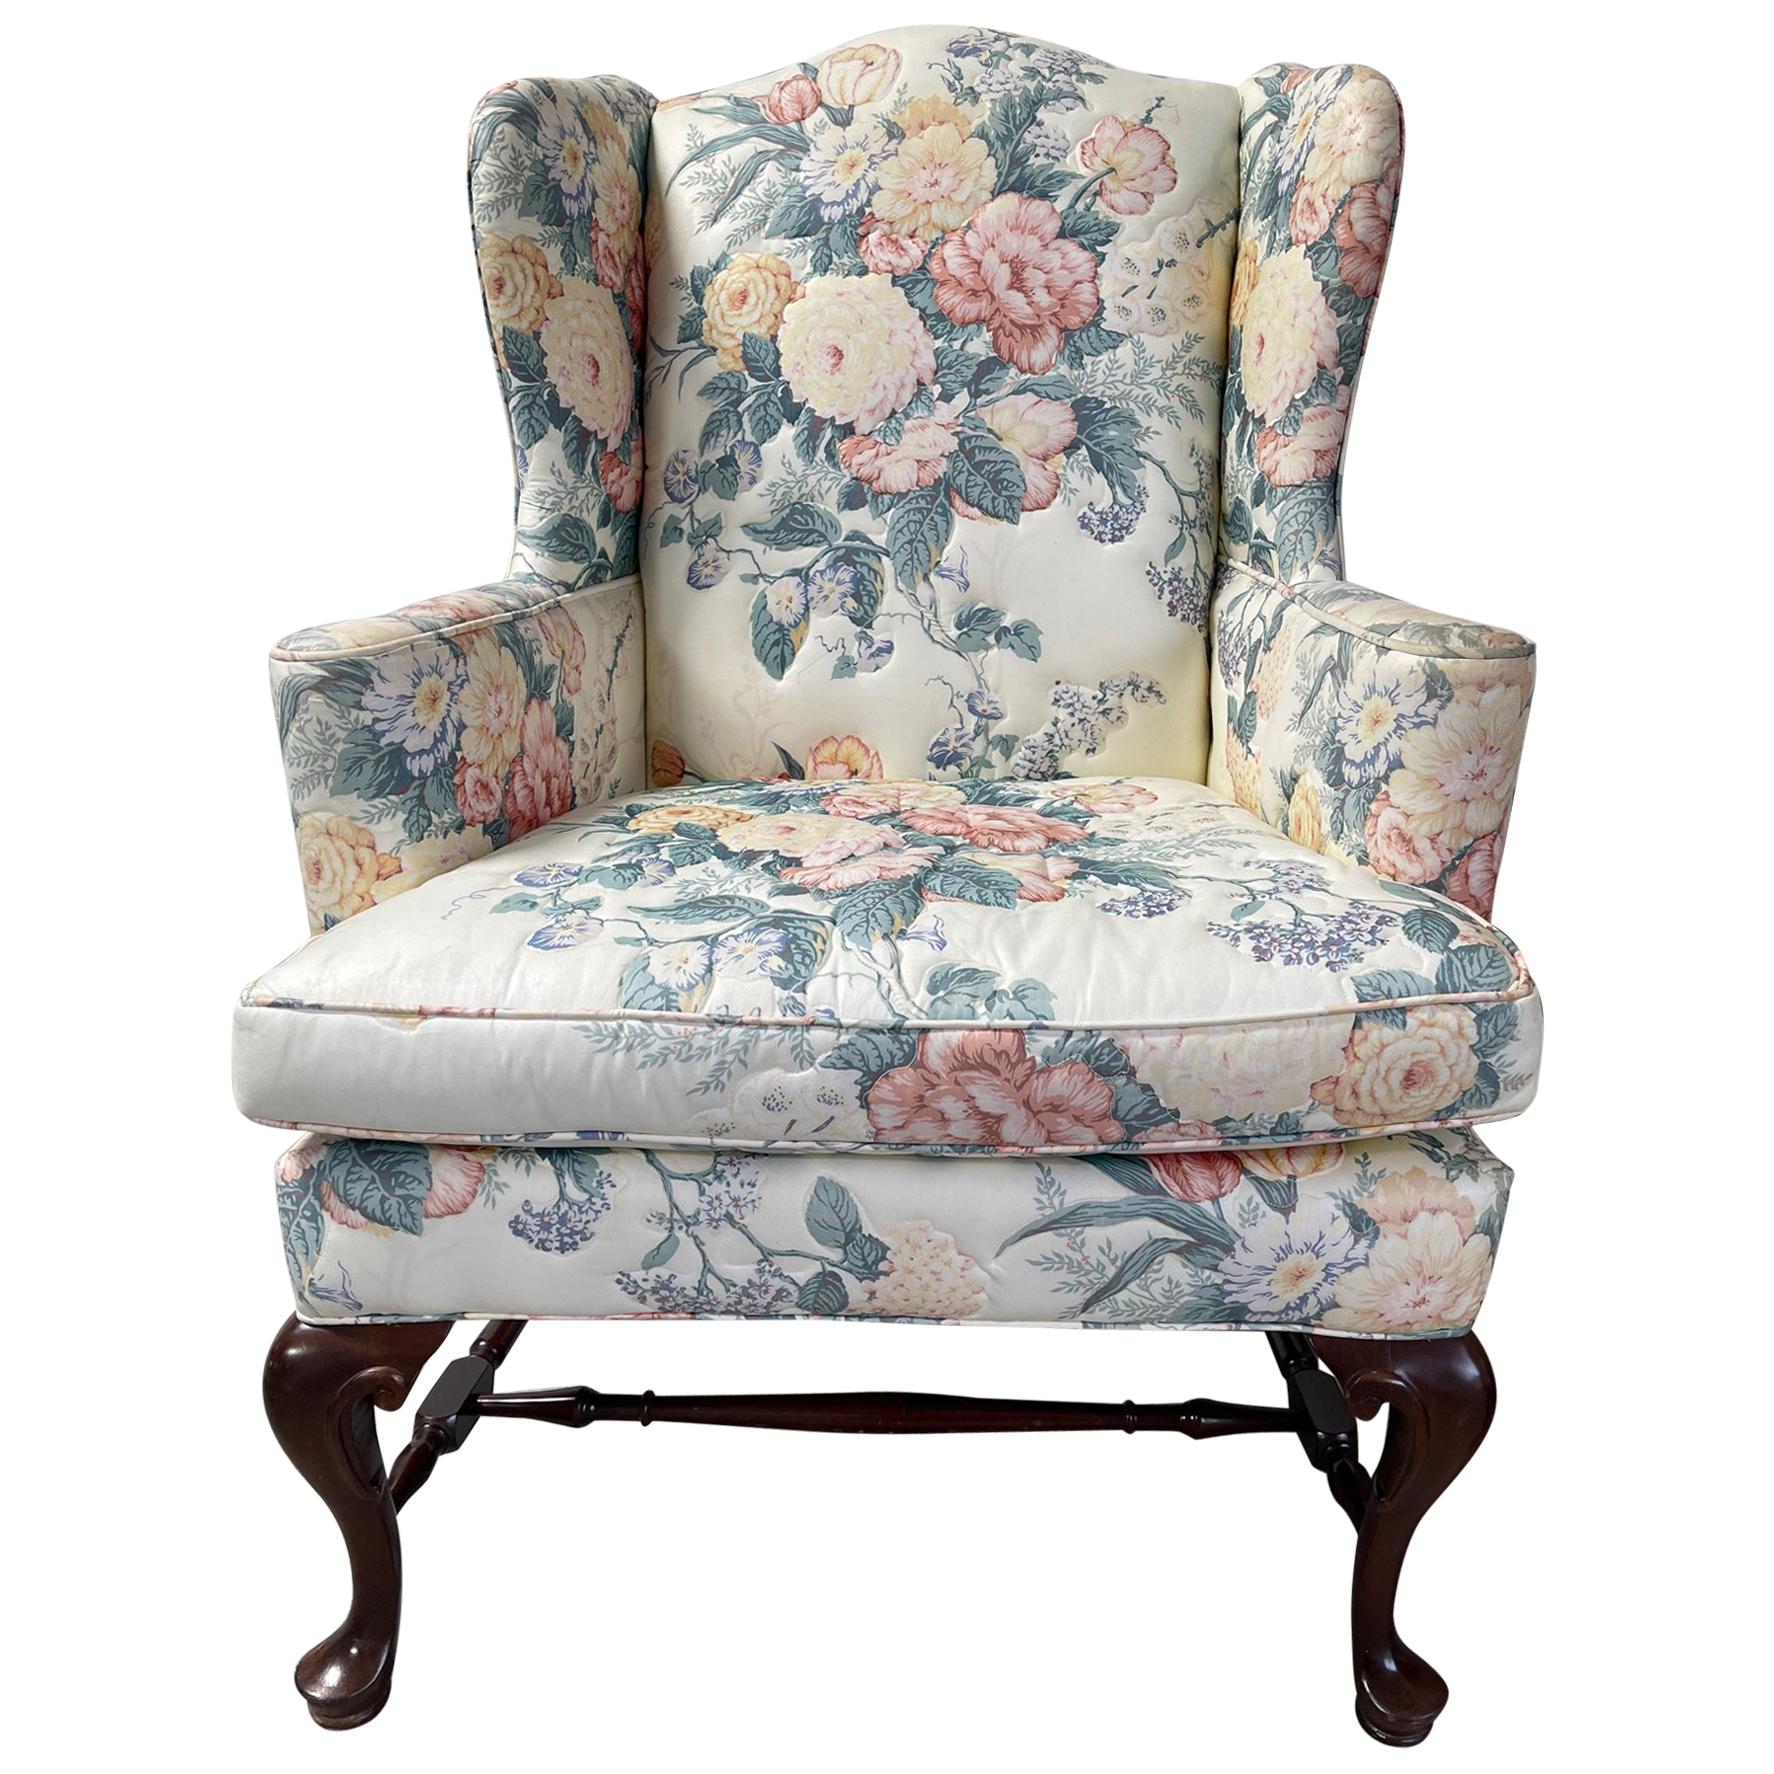 Upholstered Queen Anne Wingback Chair with Pad Feet and Stretcher, 20th Century For Sale